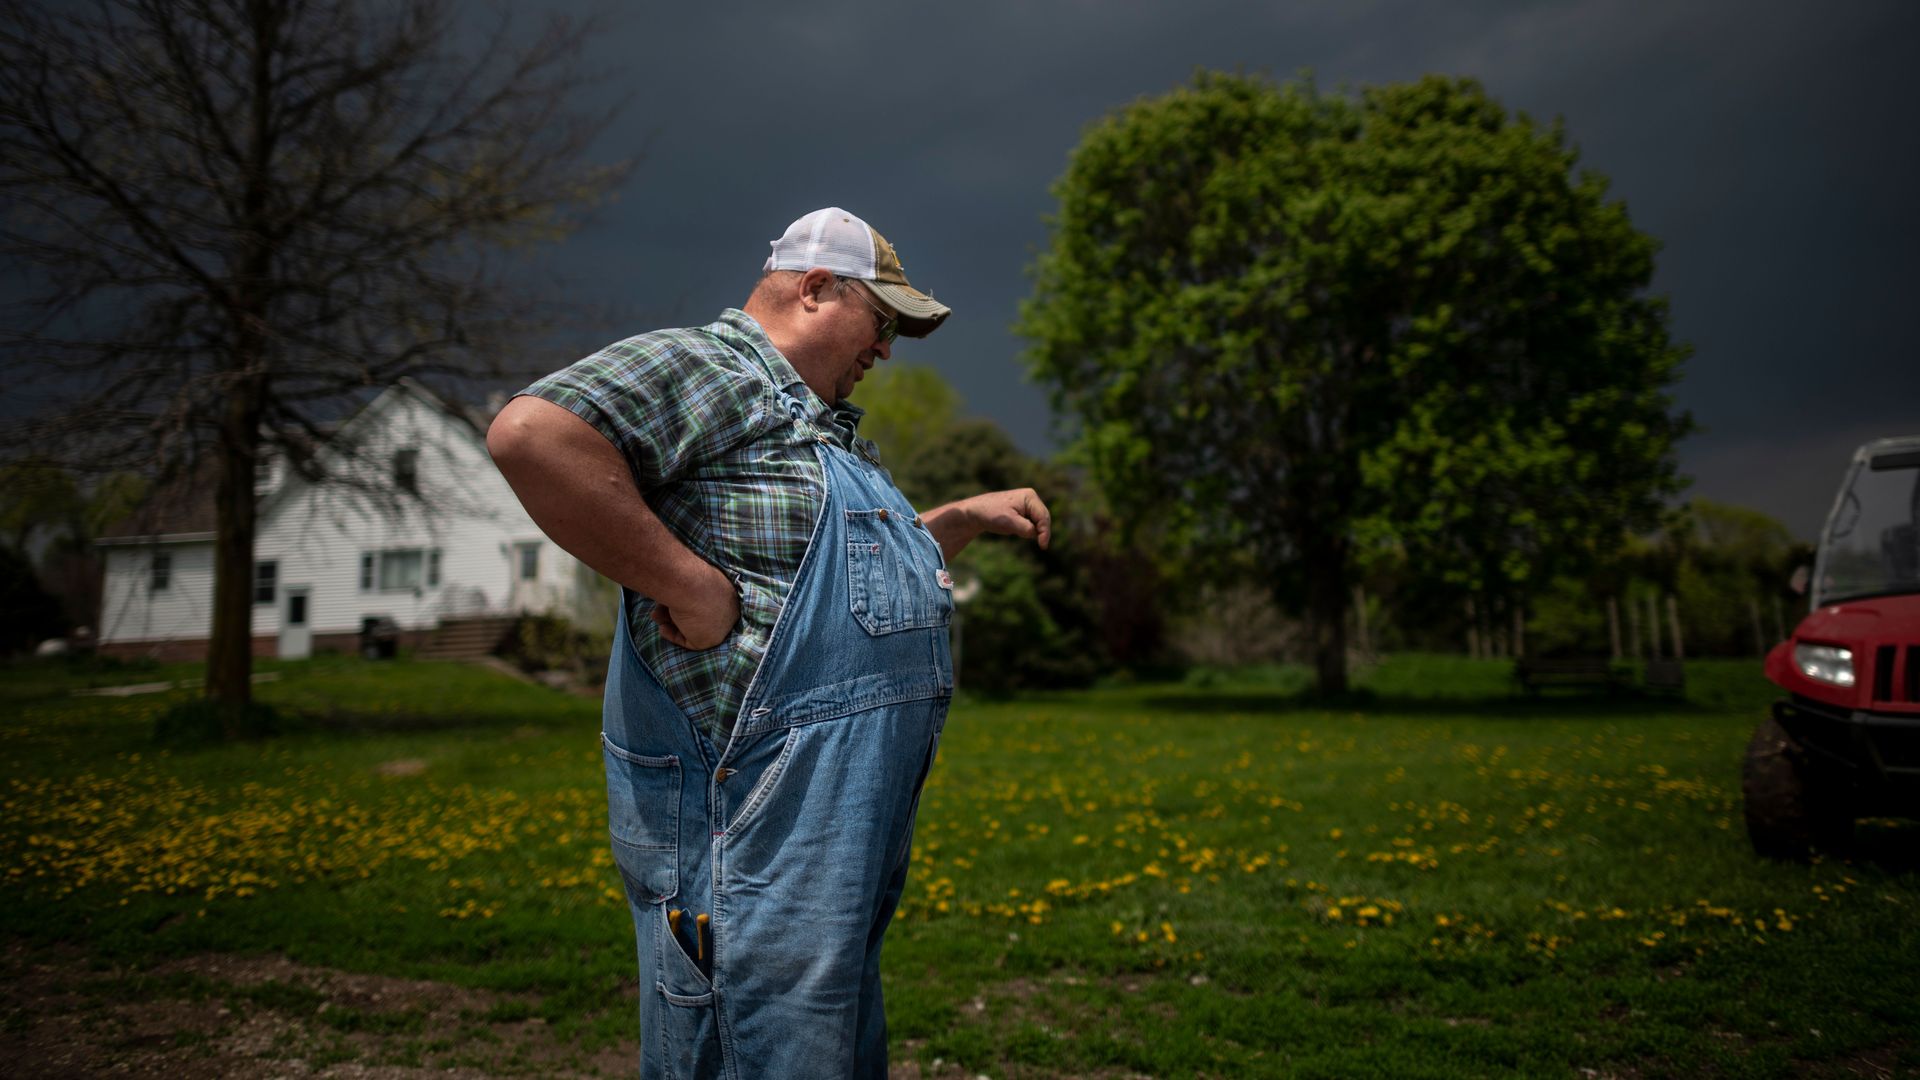 In this image, a farmer in overalls stands in a field with a white house in the background.